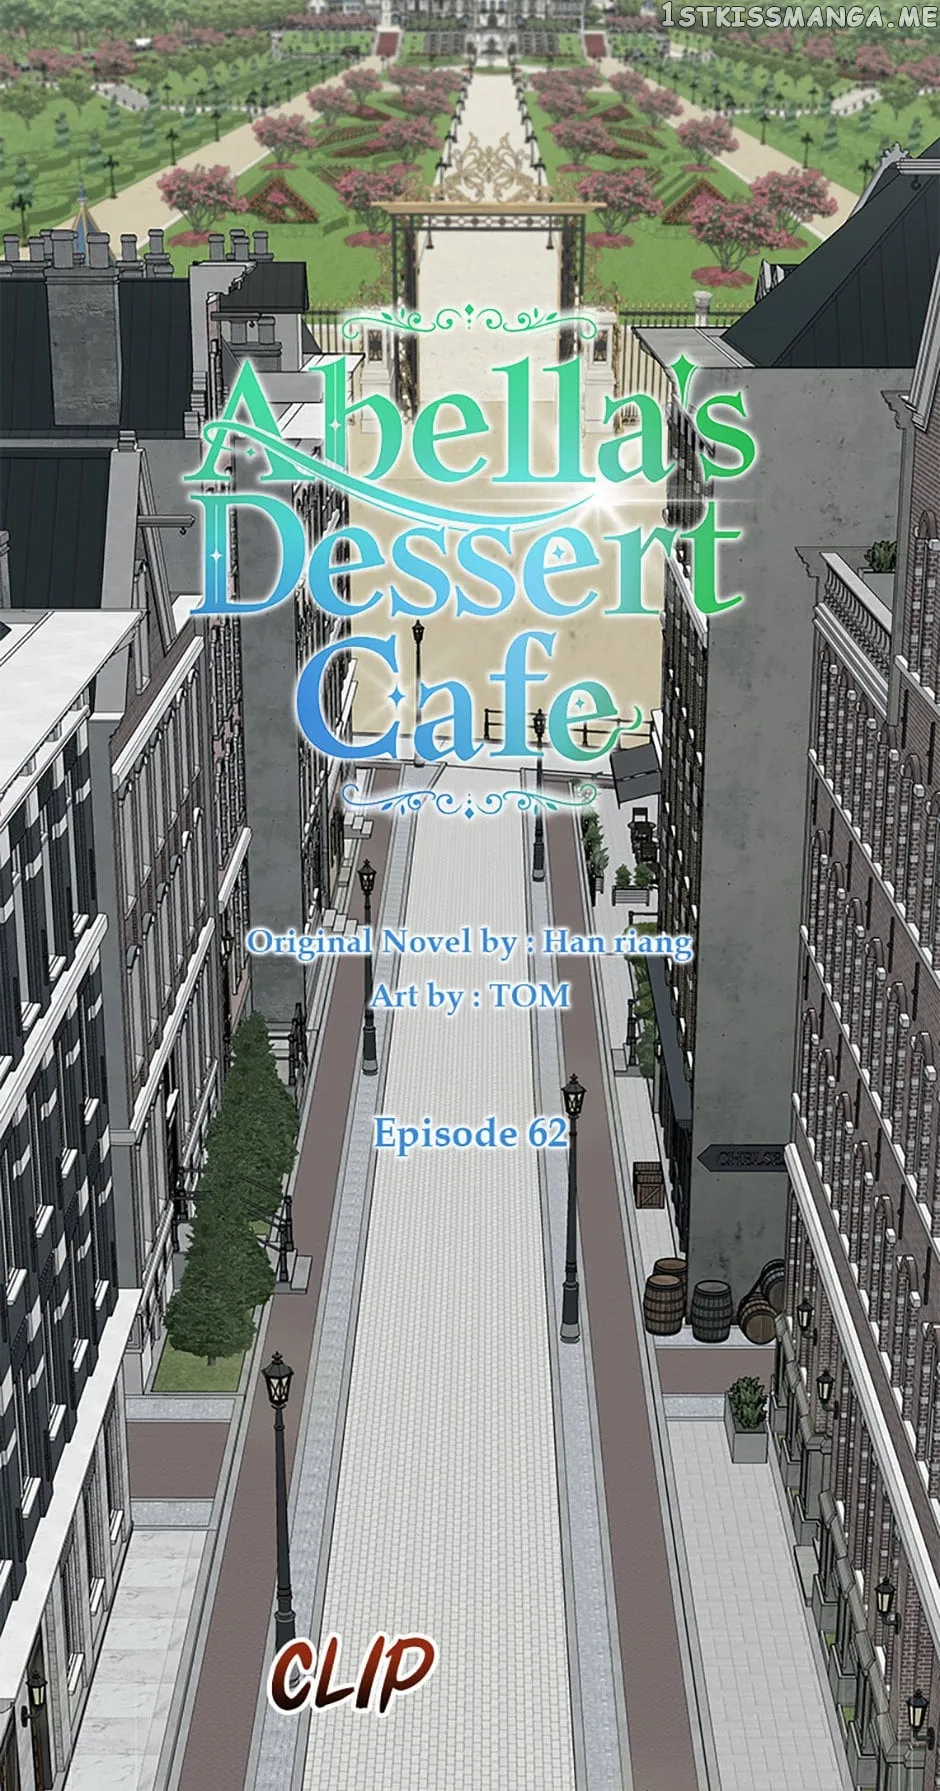 She came back and opened a dessert shop chapter 62